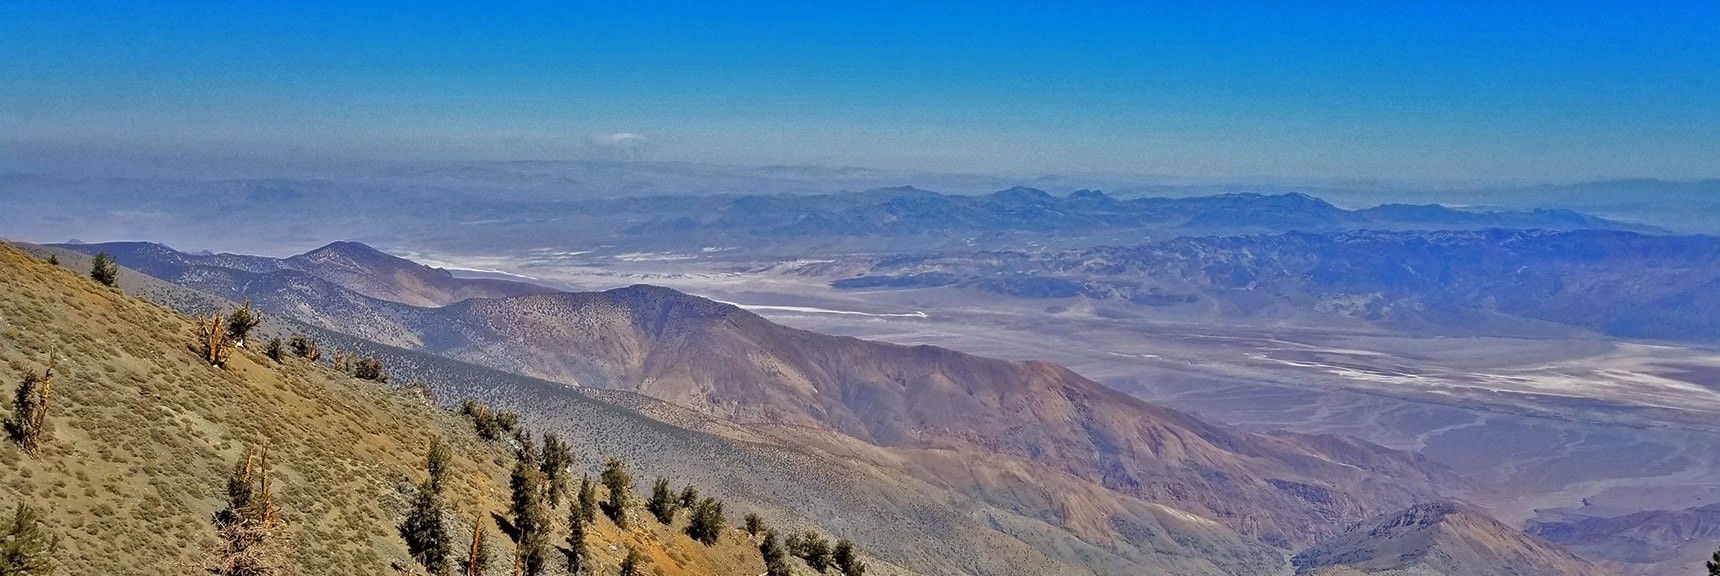 View Northeast to Death Valley Floor. Furnace Creek Ranch and Inn are Visible | Telescope Peak Summit from Wildrose Charcoal Kilns Parking Area, Panamint Mountains, Death Valley National Park, California